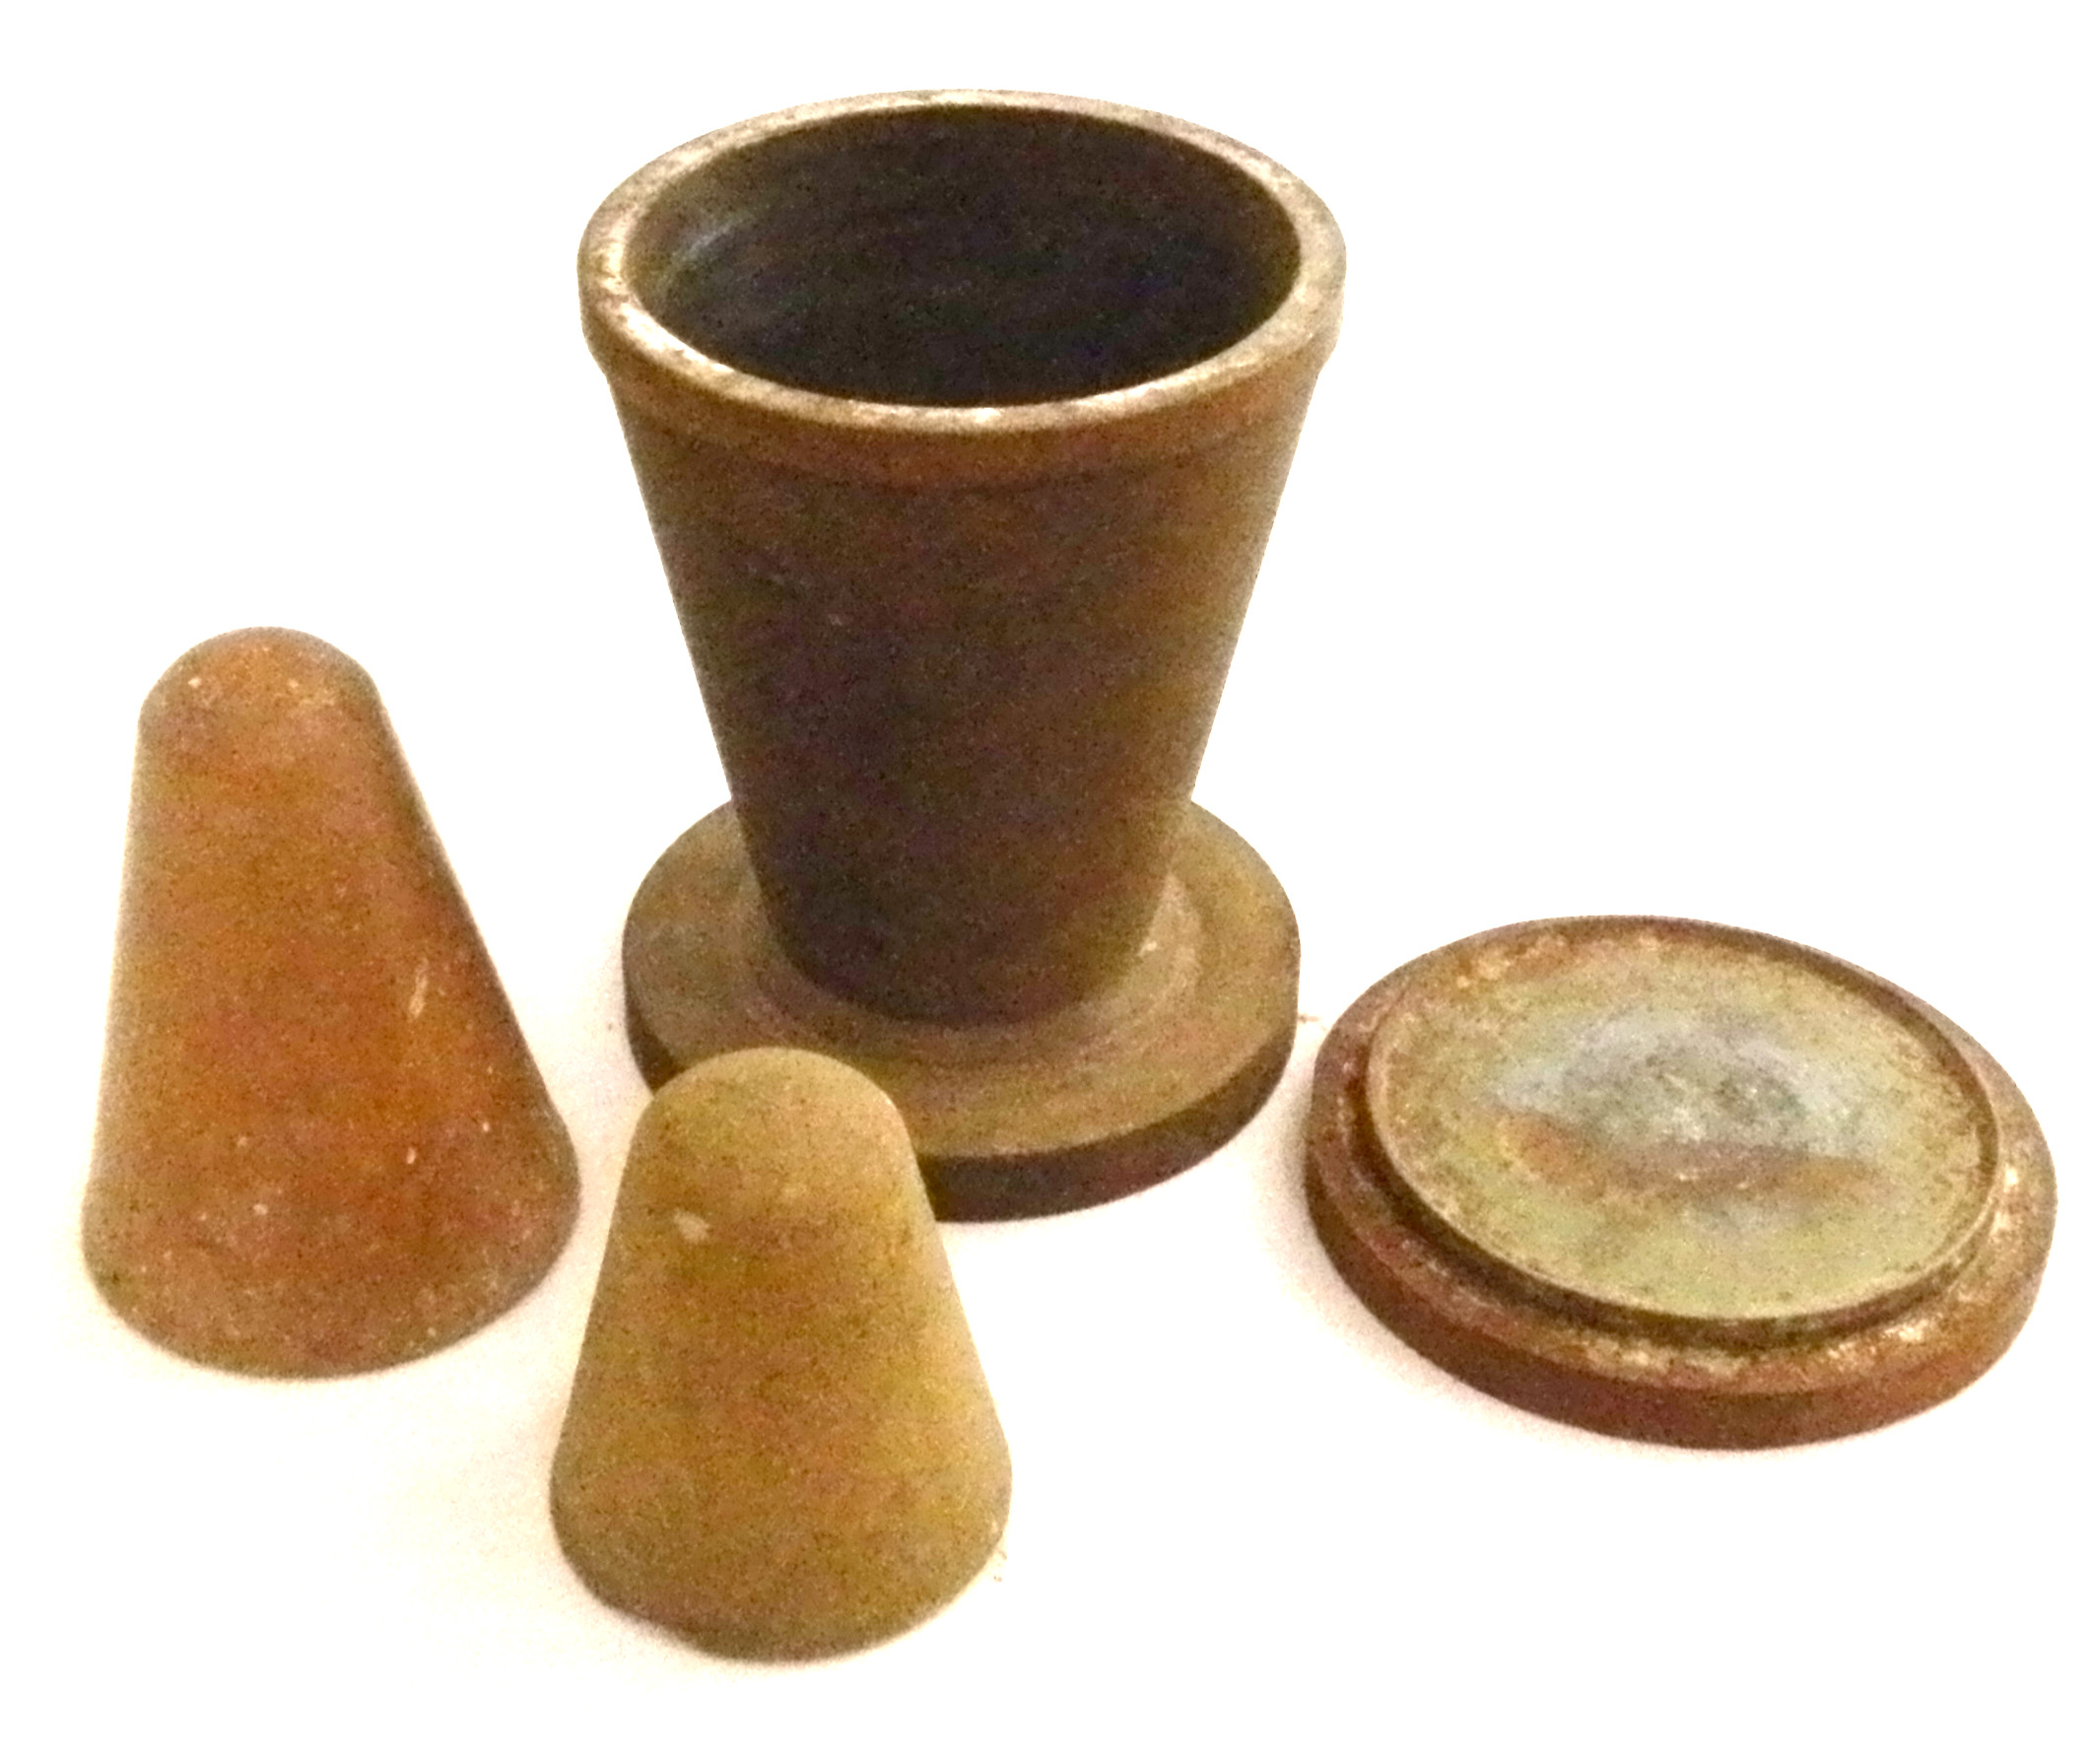 Mold and Stamps for the Thomas Radioactive Cone